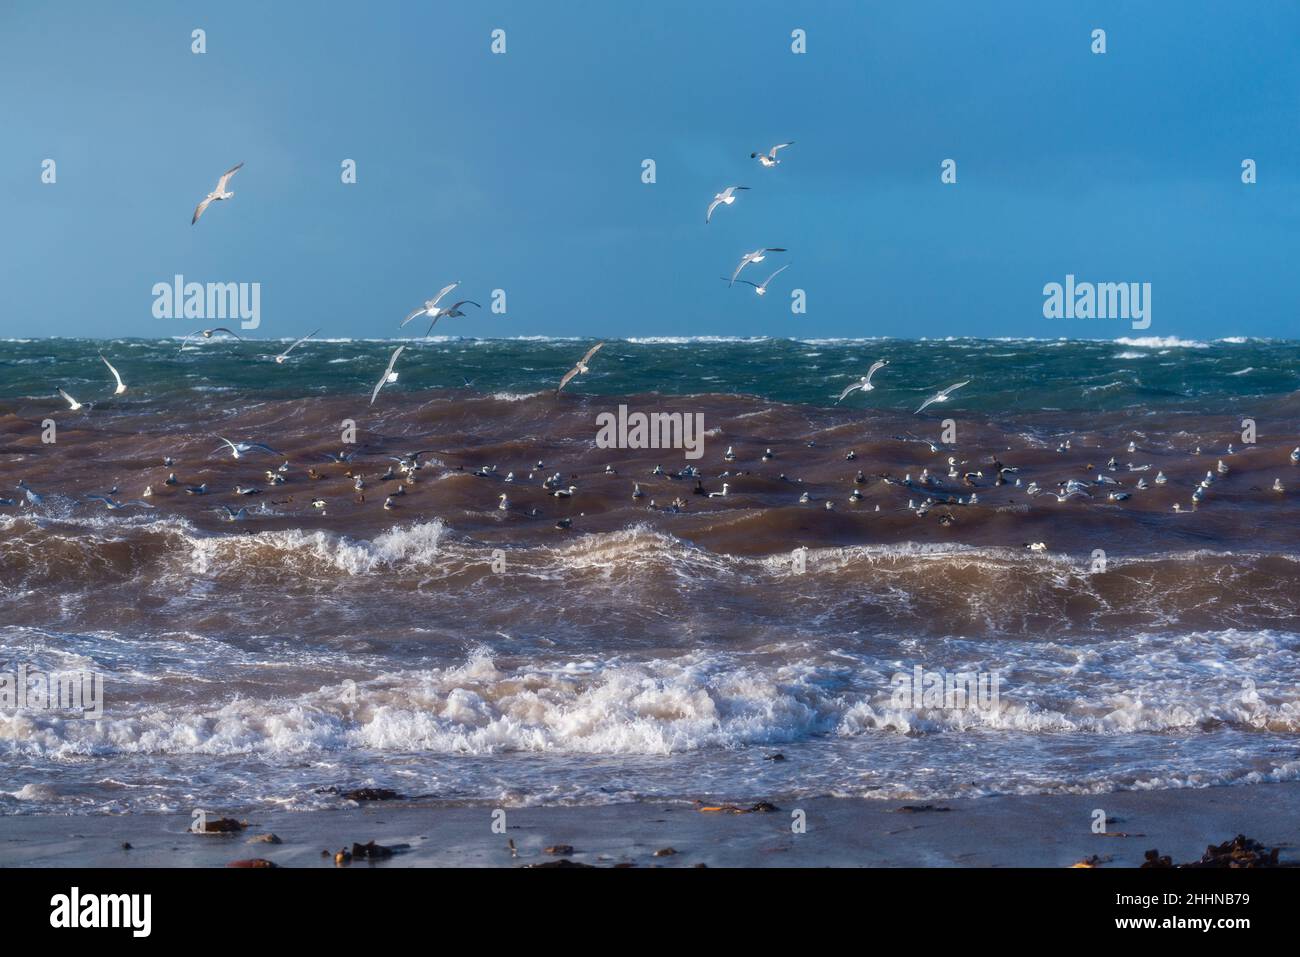 Water birds looking for some quieter place in stormy weather conditions, North Sea island of Heligoland, Northern Germany, Central Europe Stock Photo